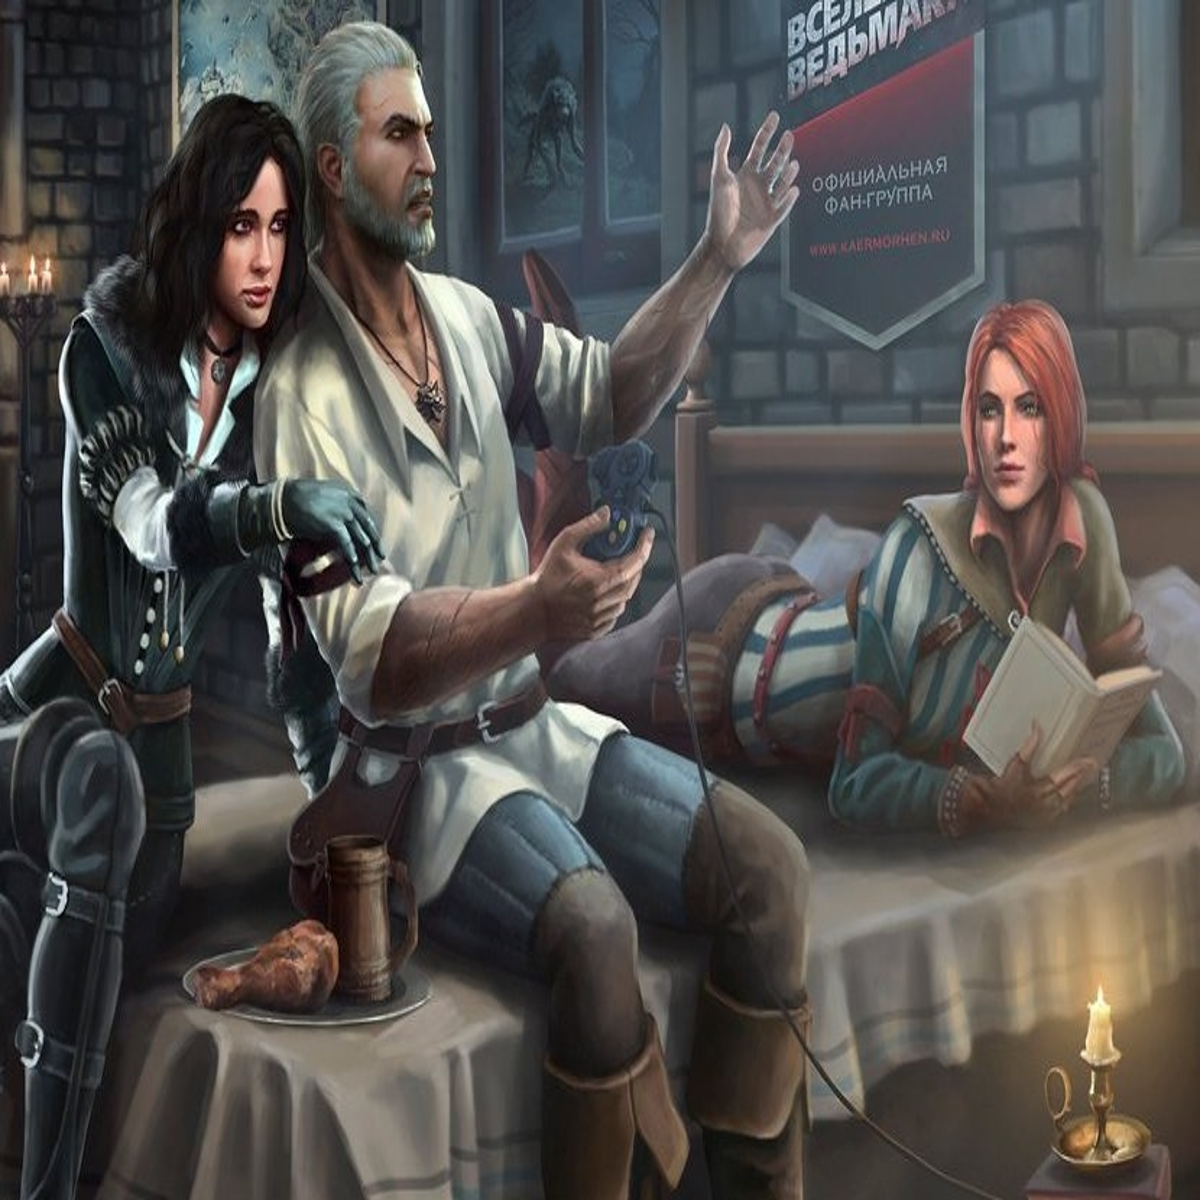 The Witcher 3 Mission King's Gambit 